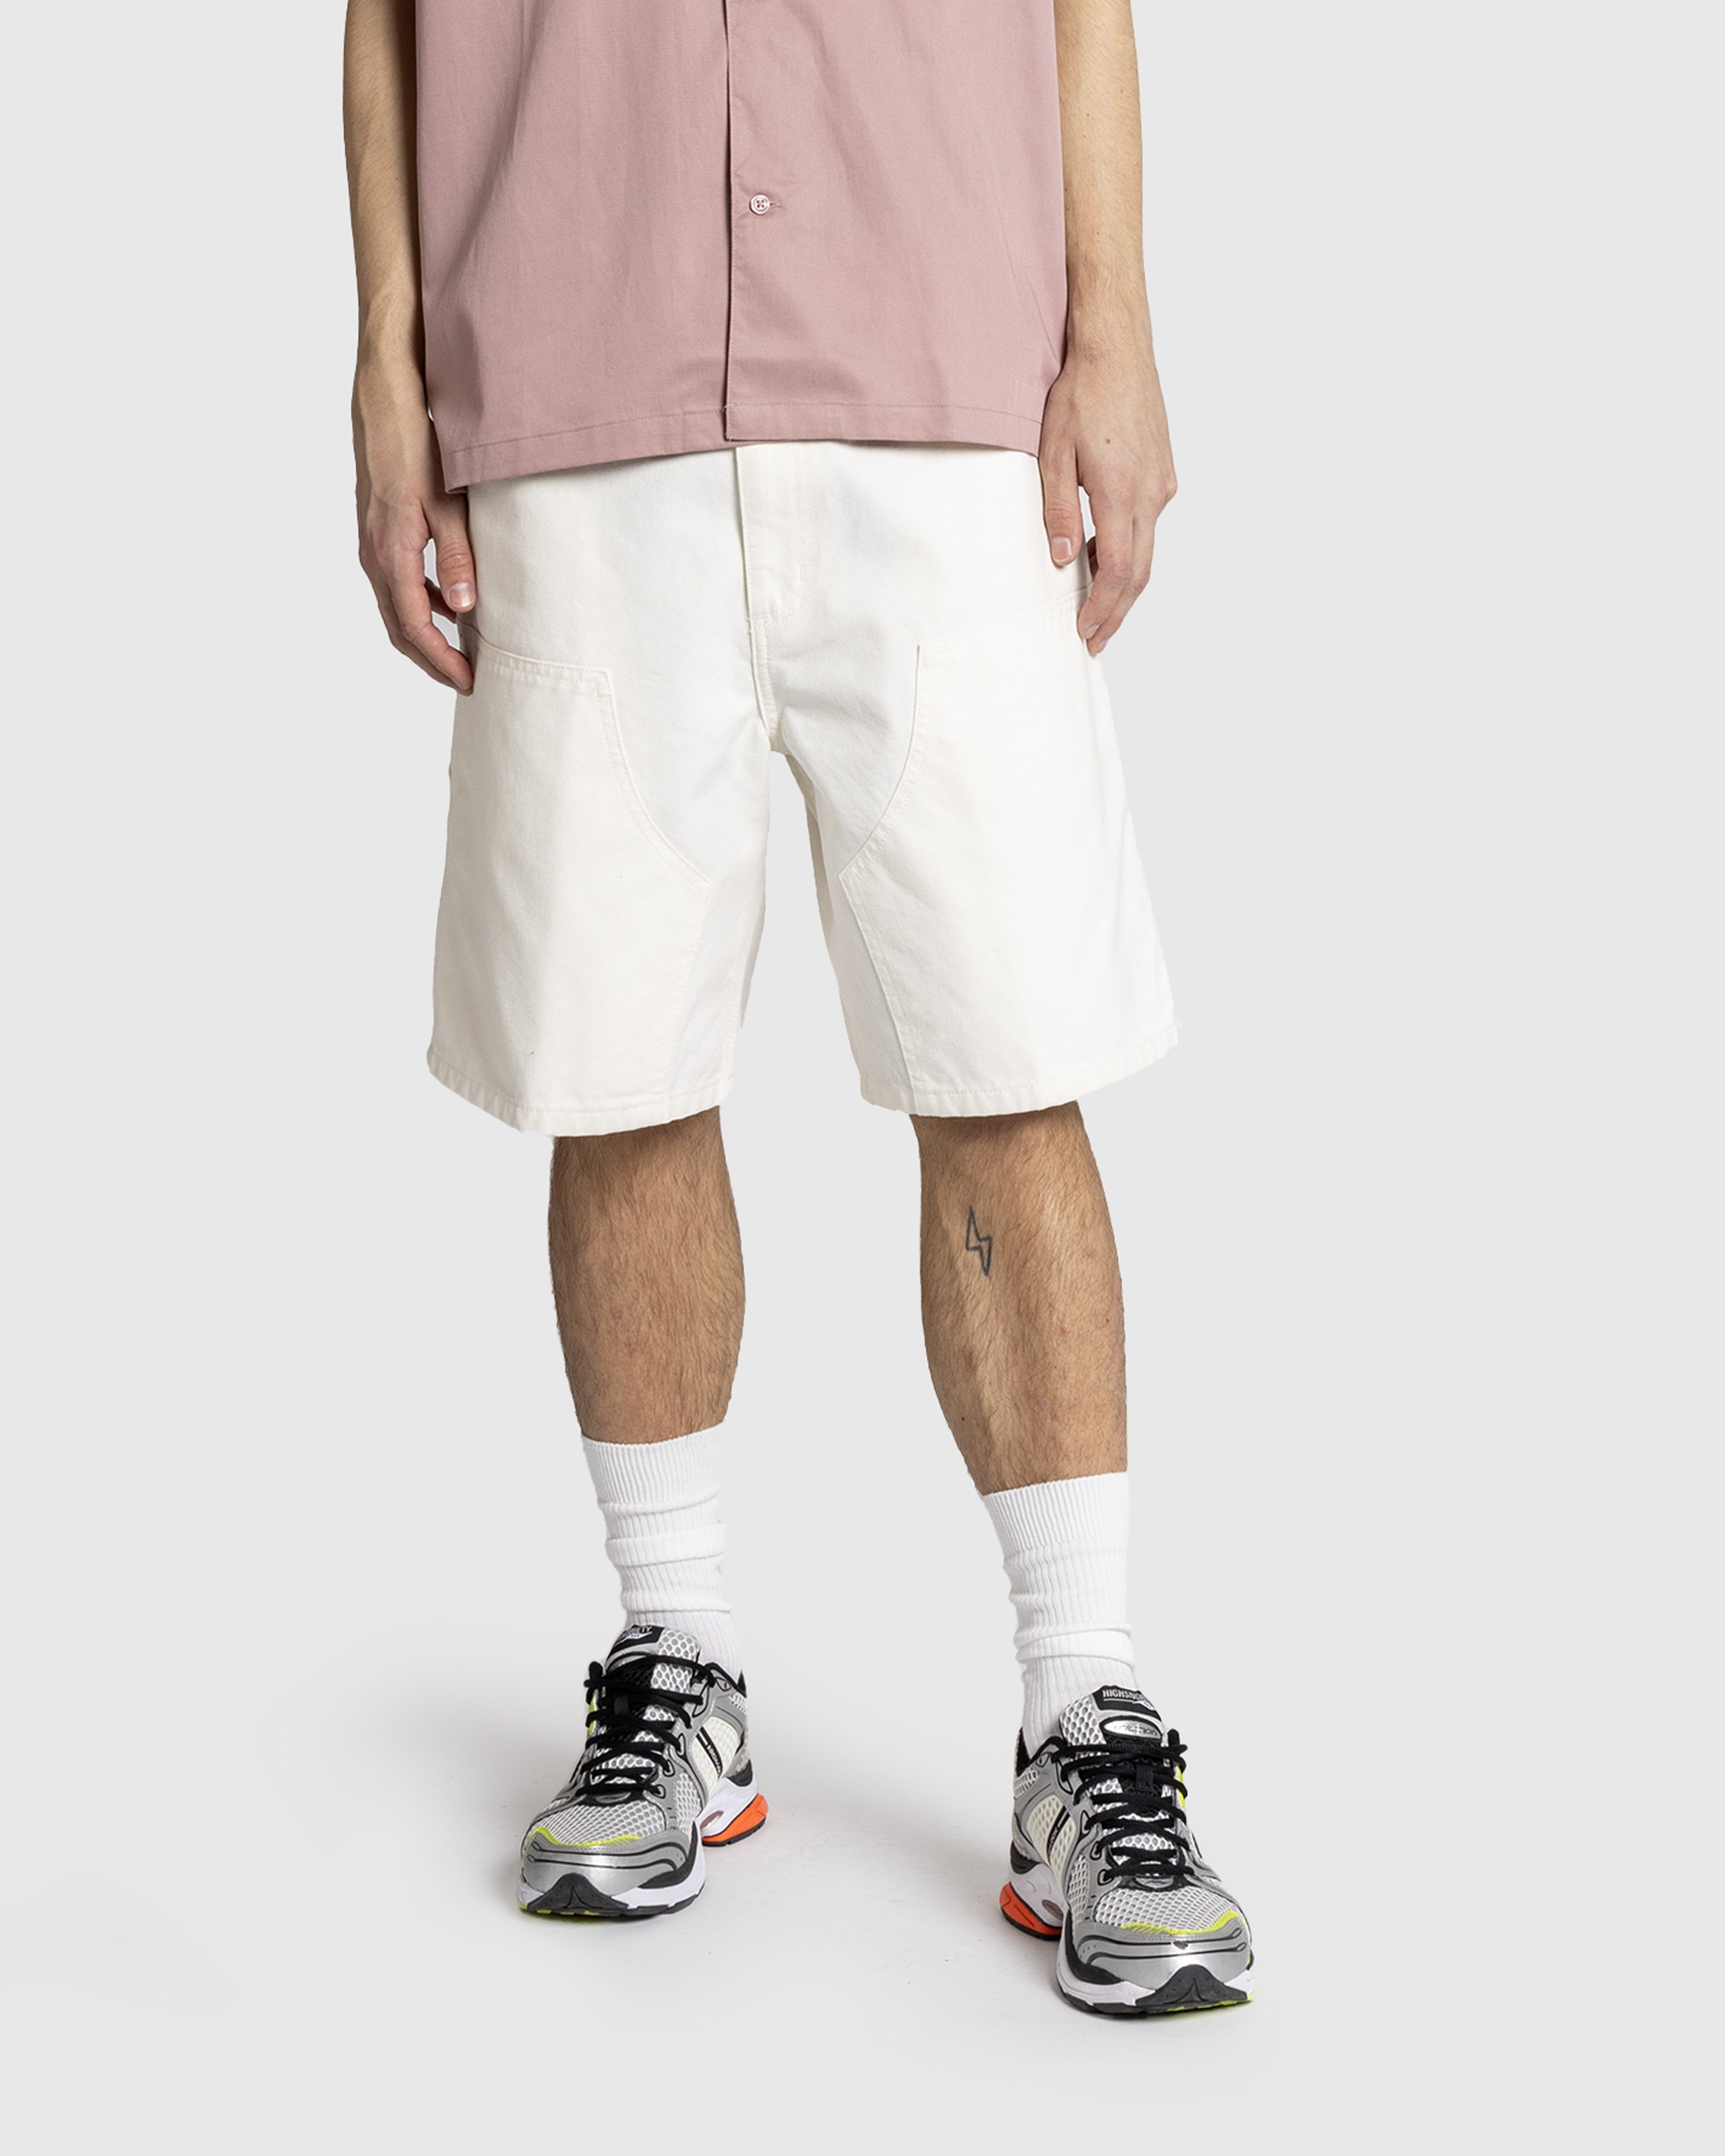 Carhartt WIP - Double Knee Short Wax /rinsed - Clothing - White - Image 2